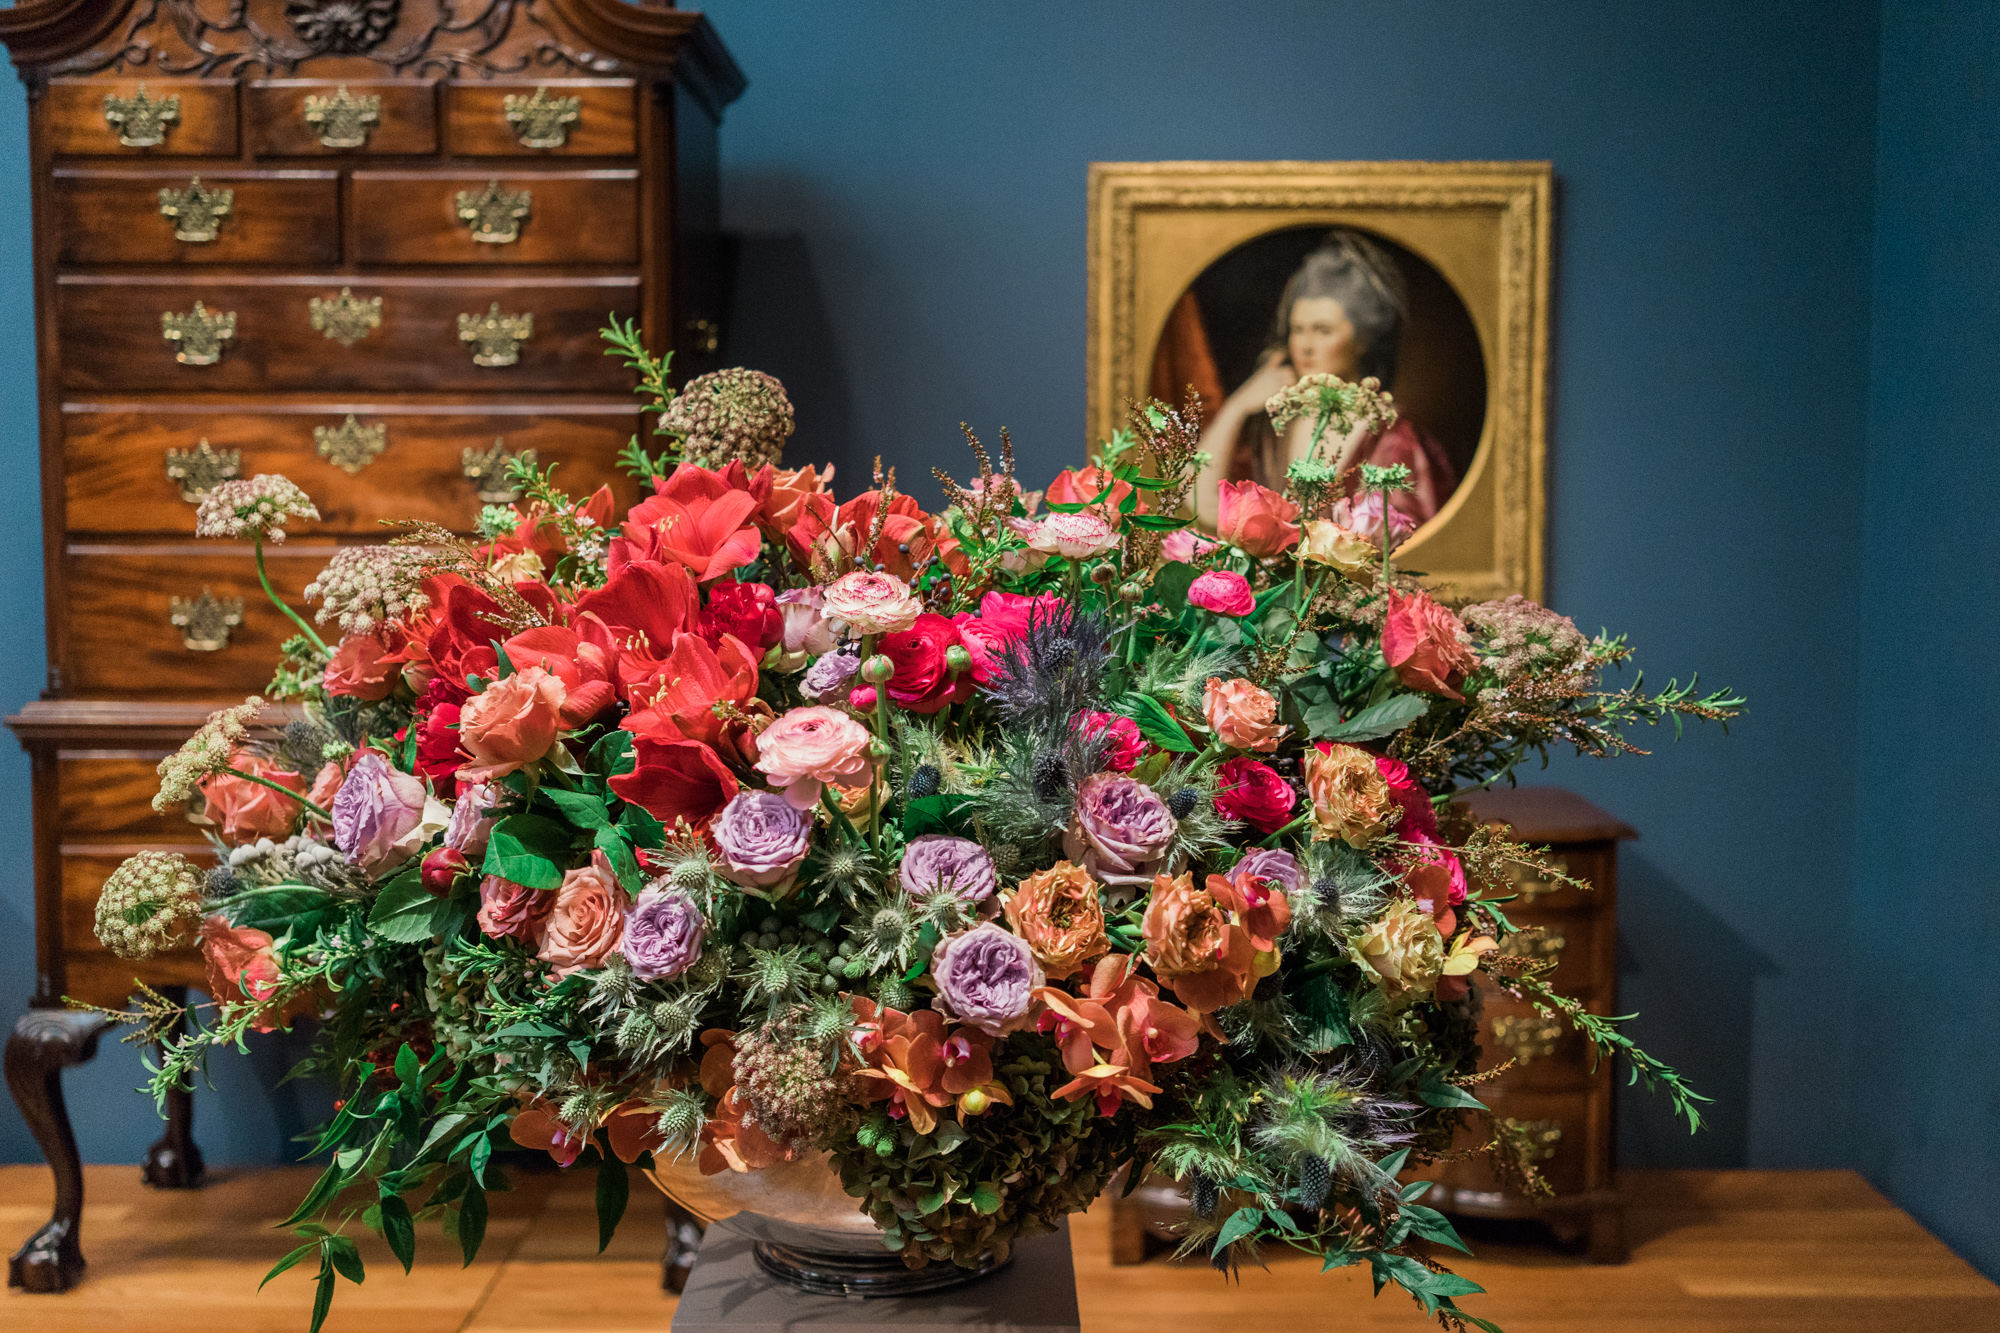 An Art Break In San Francisco Bouquets To Art At The De Young Museum